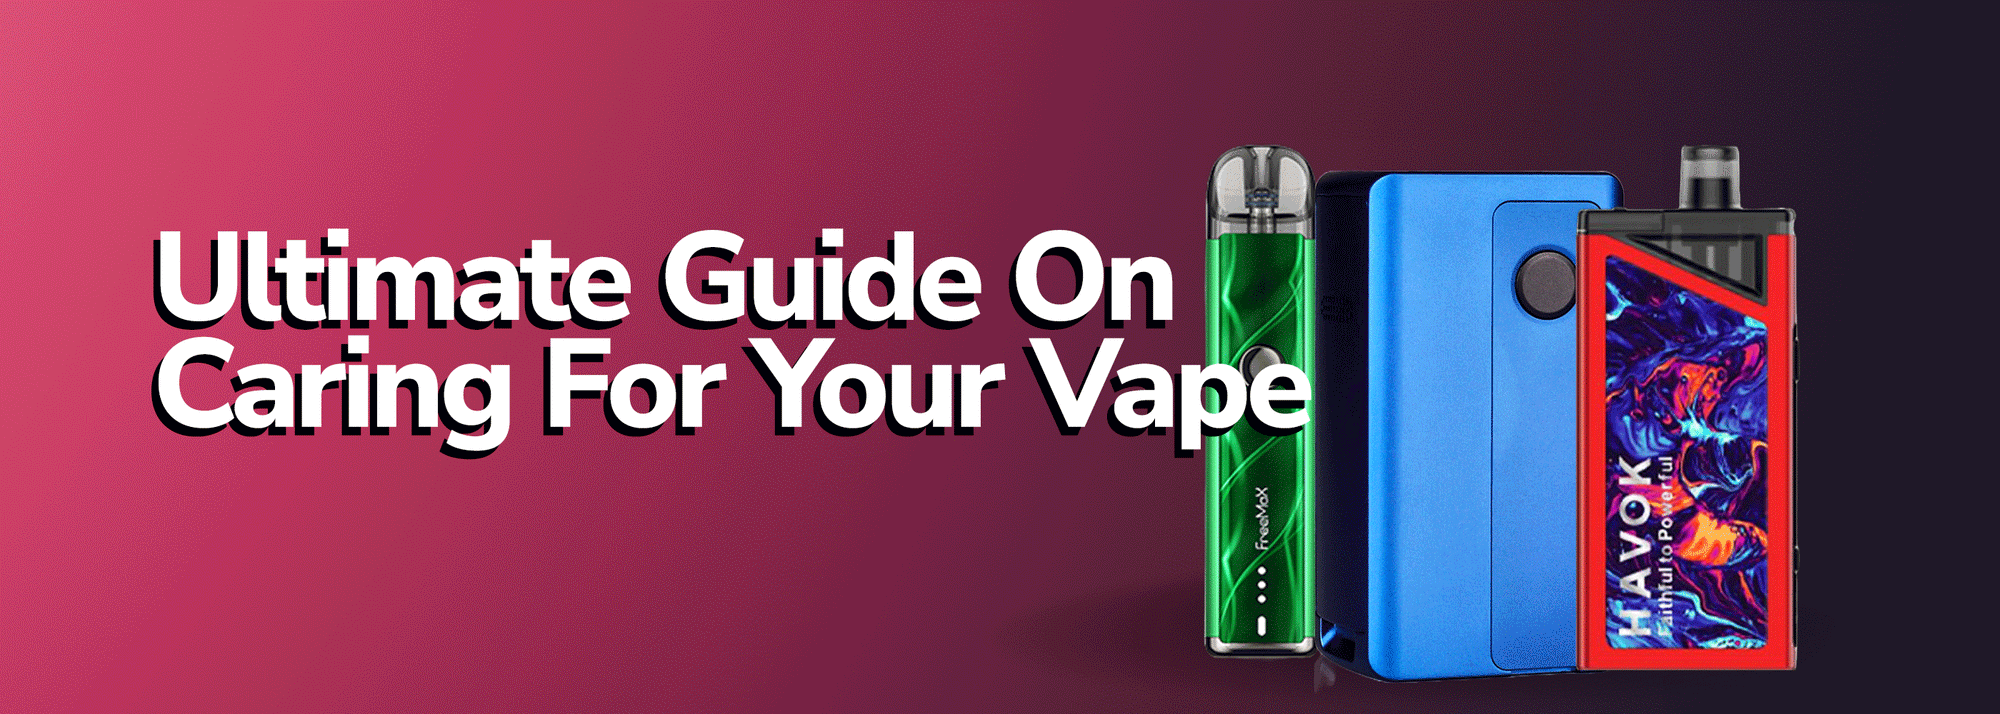 Ultimate Guide On Caring For Your Vape - Wick and Wire Co Melbourne Vape Shop, Victoria Australia